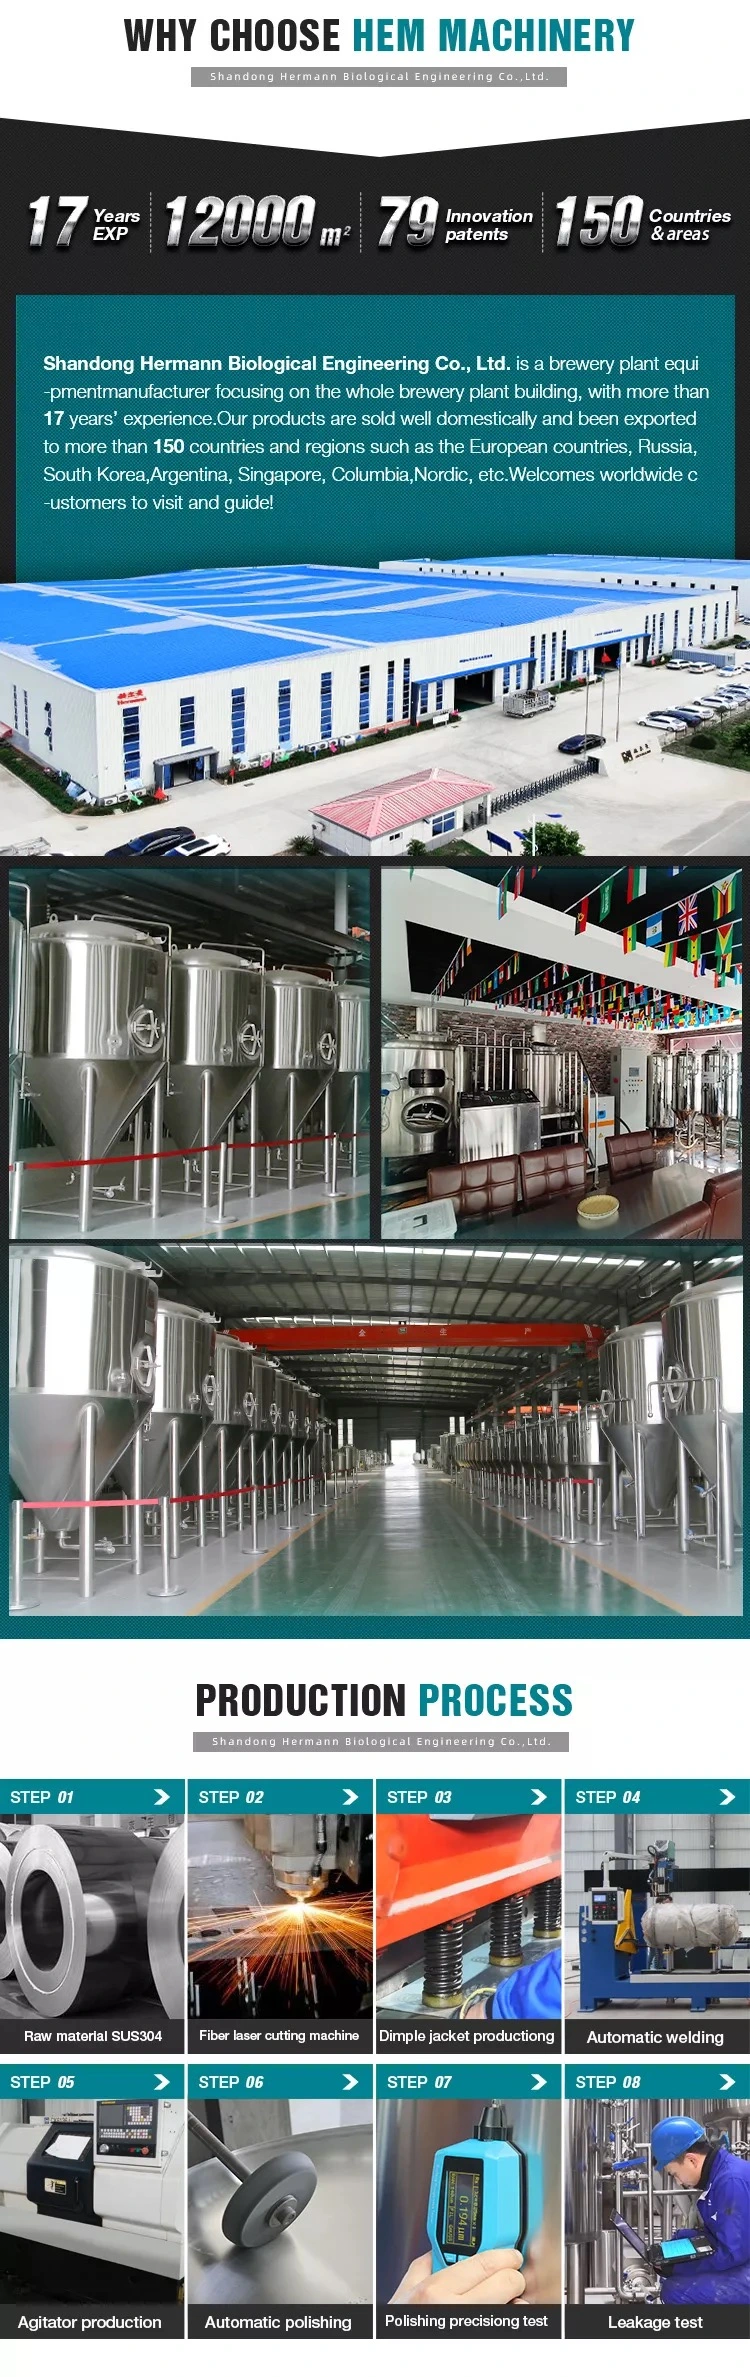 Copper Fermentation Tank 5bbl 10bbl 15bbl 20bbl Beer Equipment Brewery for Beer Production Equipment